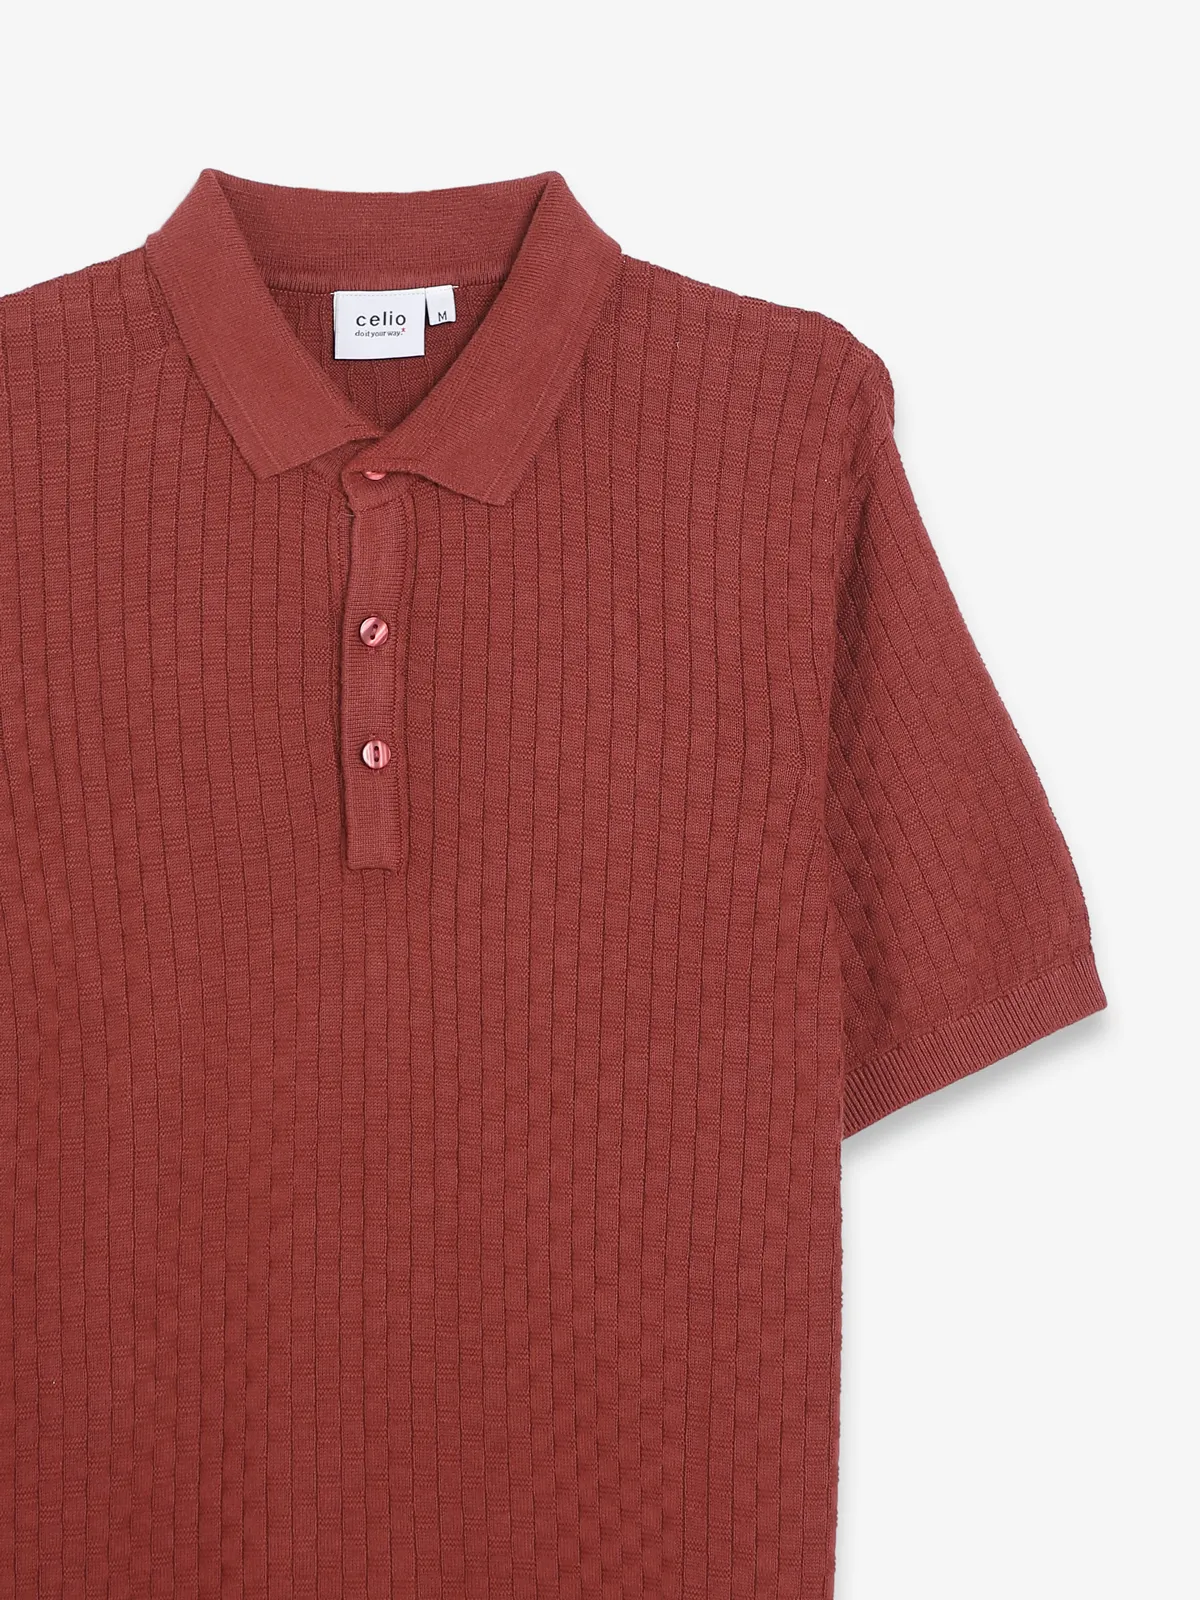 Celio brown knitted polo t shirt